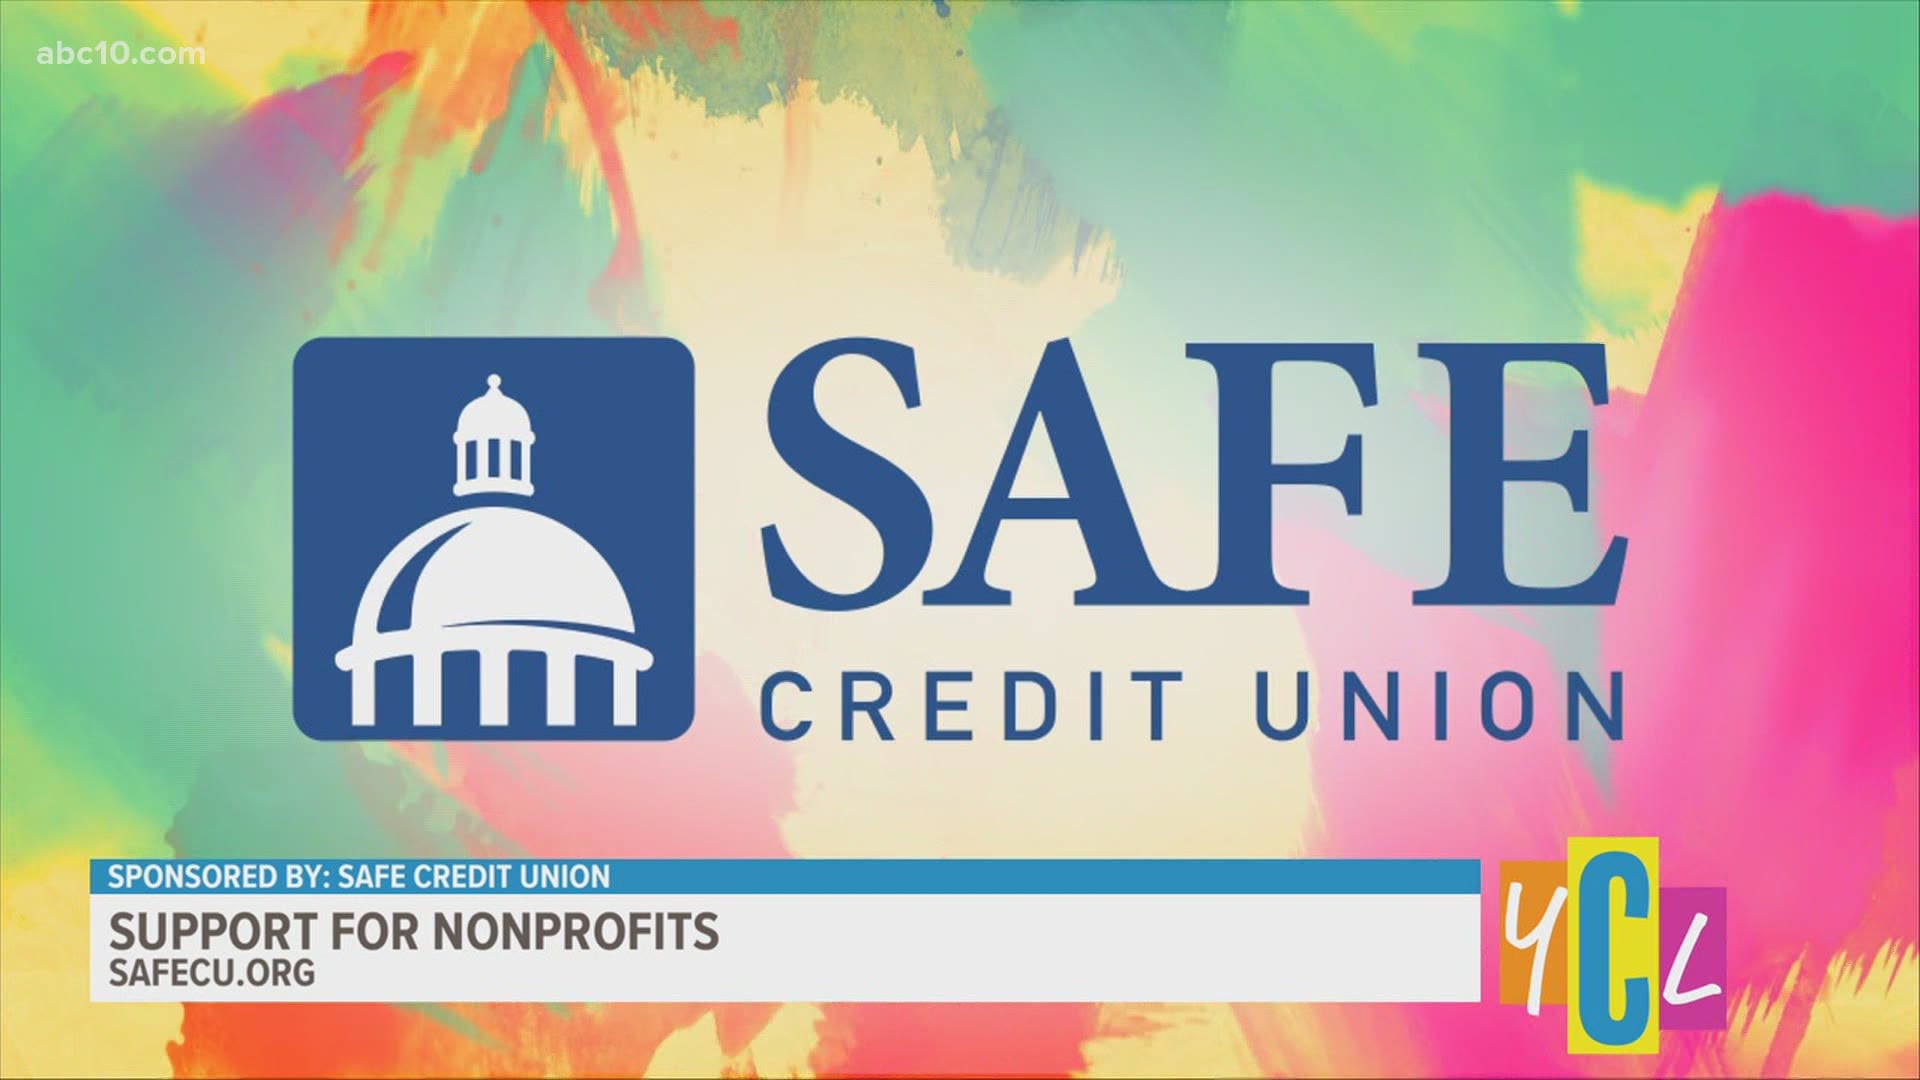 SAFE Credit Union is helping to uplift the community and its needs by supporting local nonprofits. This segment paid for by SAFE Credit Union.